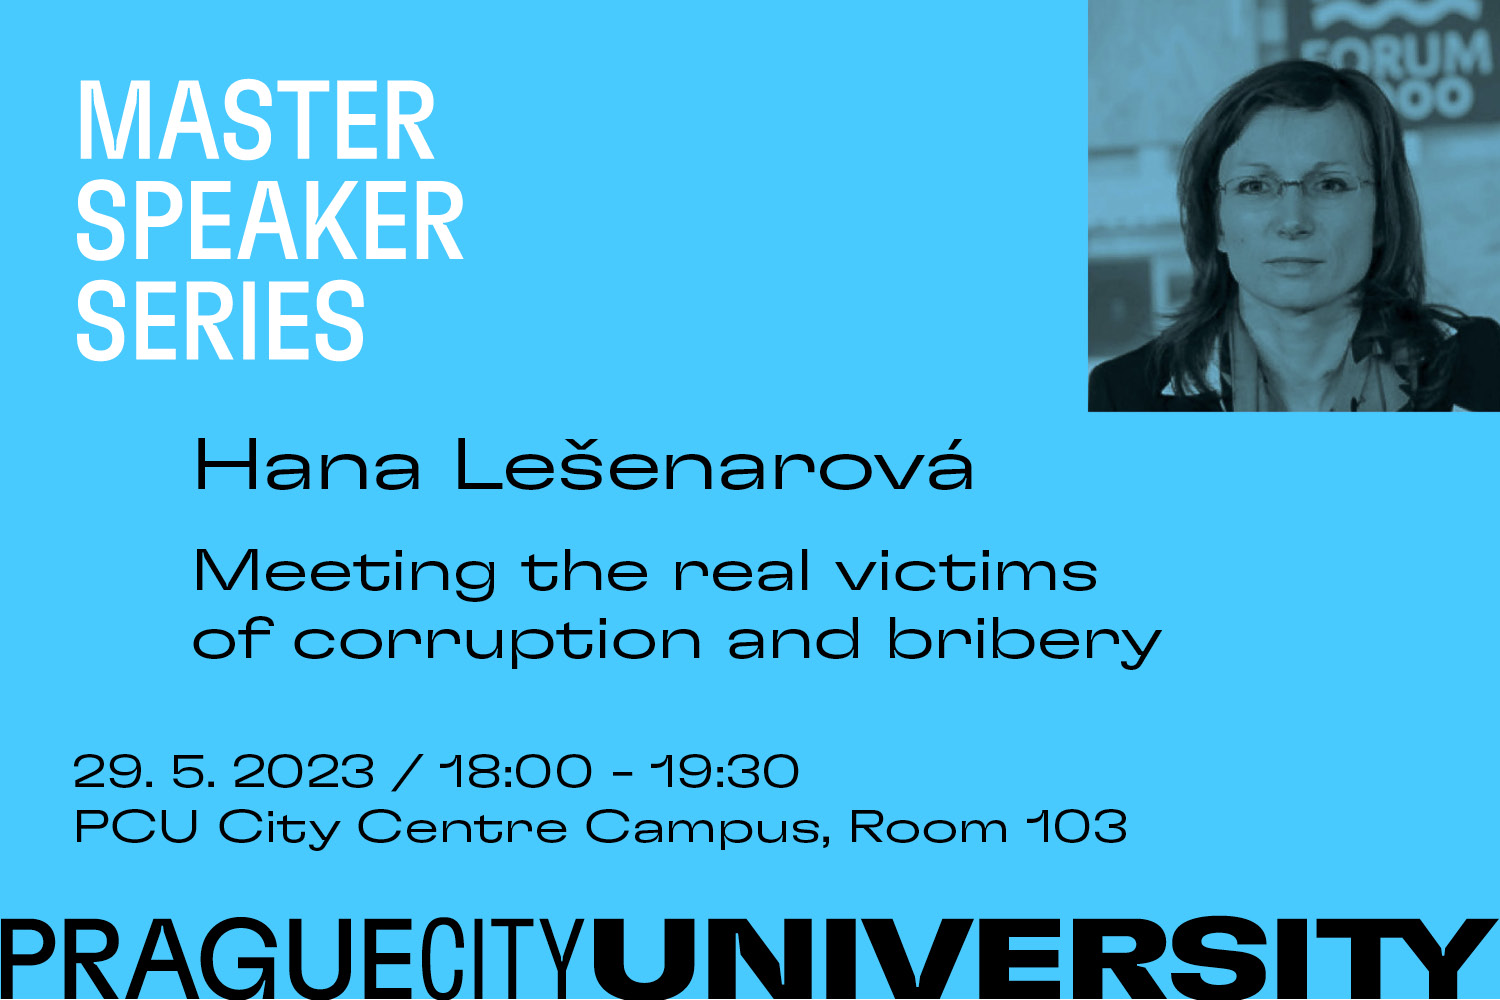 Master Speaker Series with Hana Lešnarová and her talk Meeting the real victims of corruption and bribery, at PCU City Centre Campus, room 103 on 29.5.2023 at 18.00